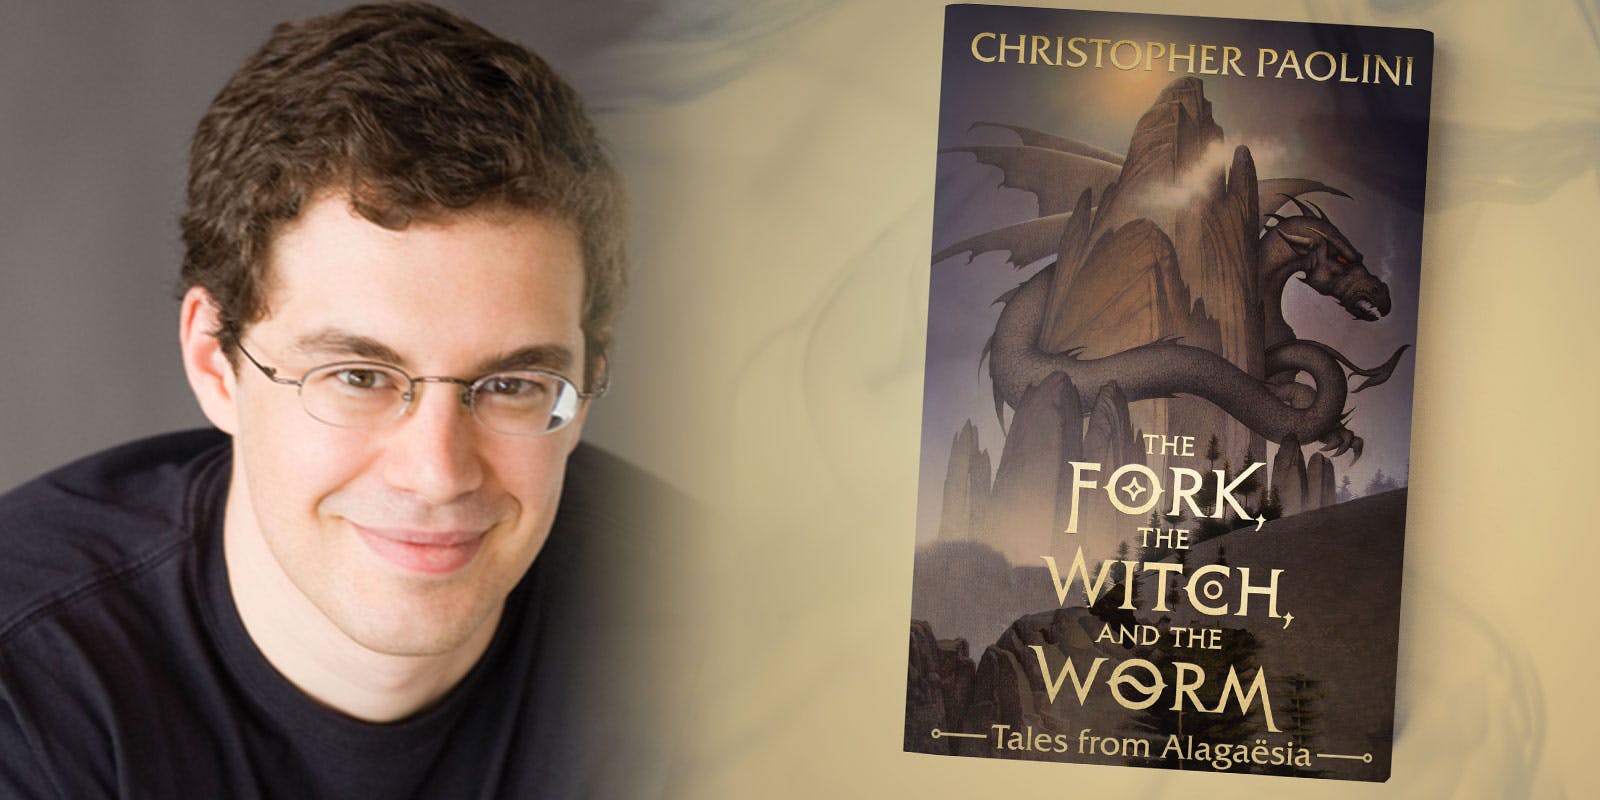 A conversation with Christopher Paolini